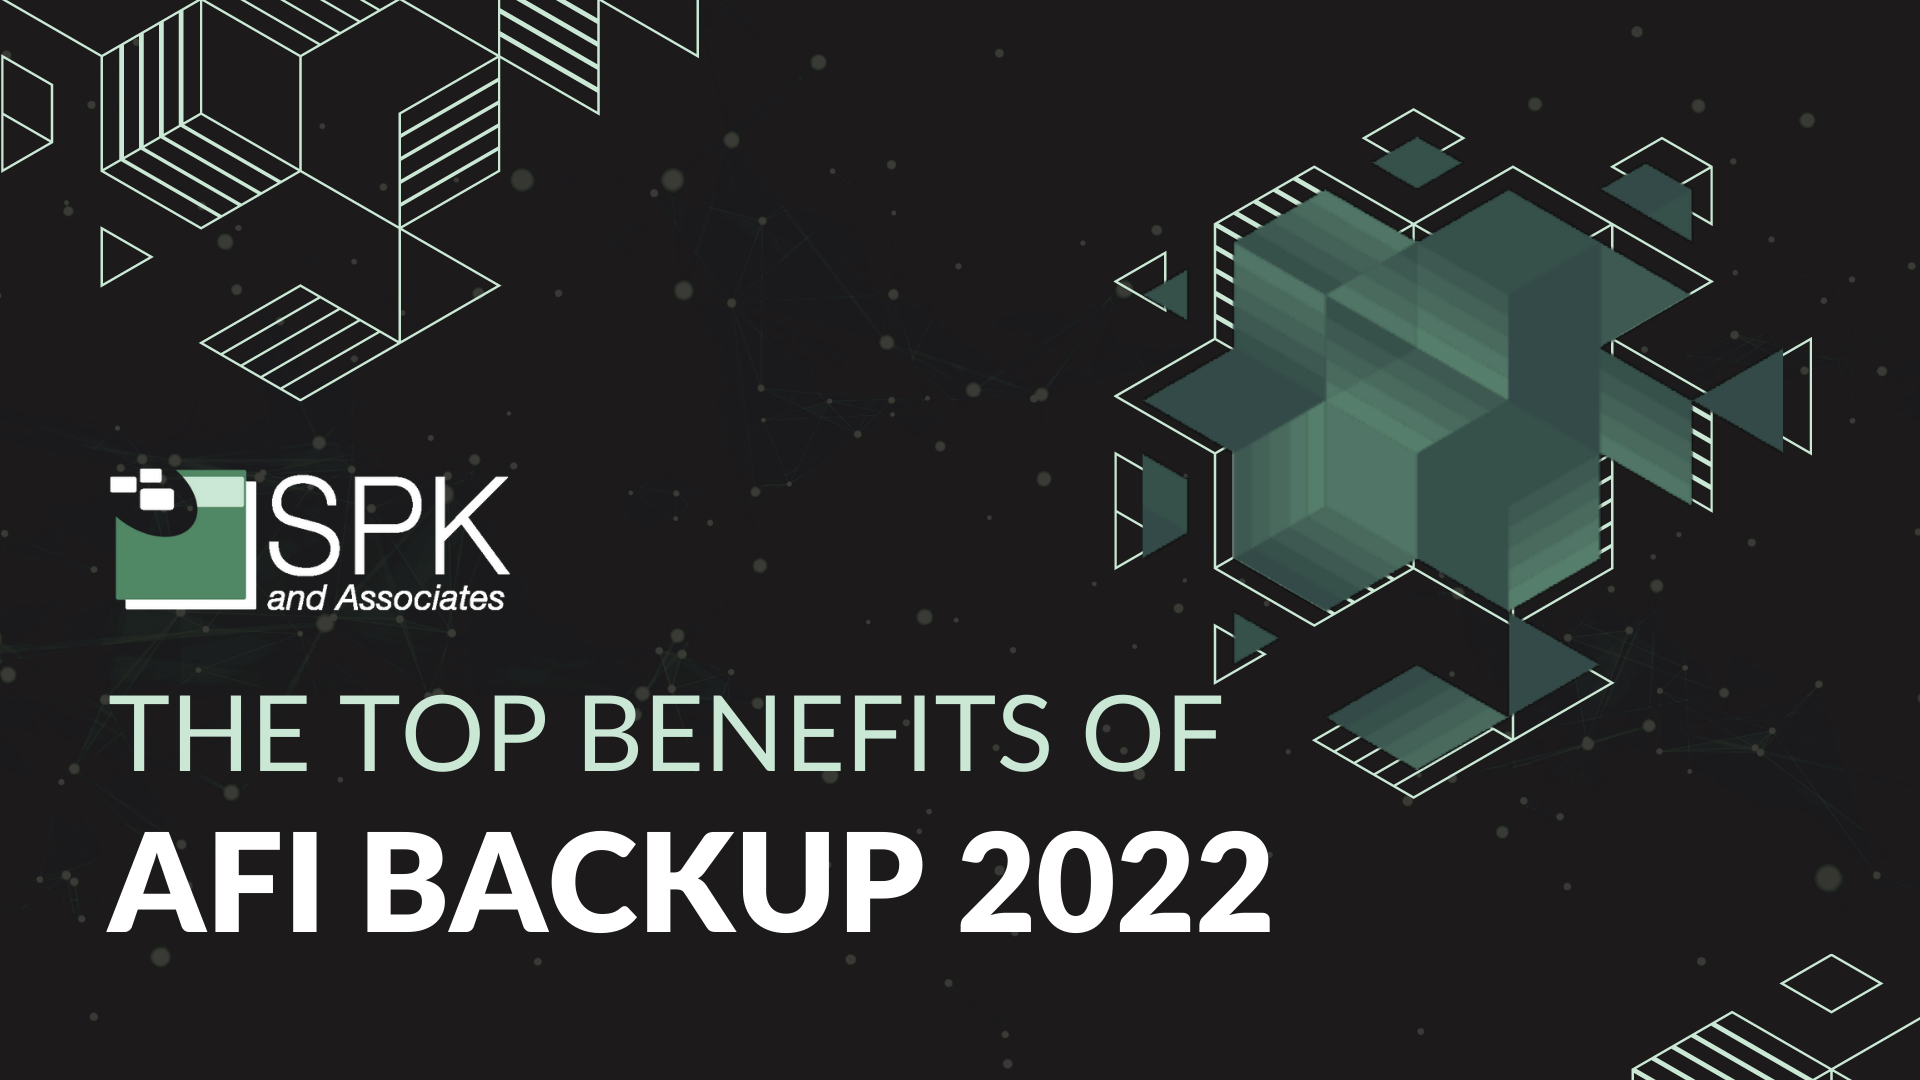 The Top Benefits of AFI Backup 2022 featured image